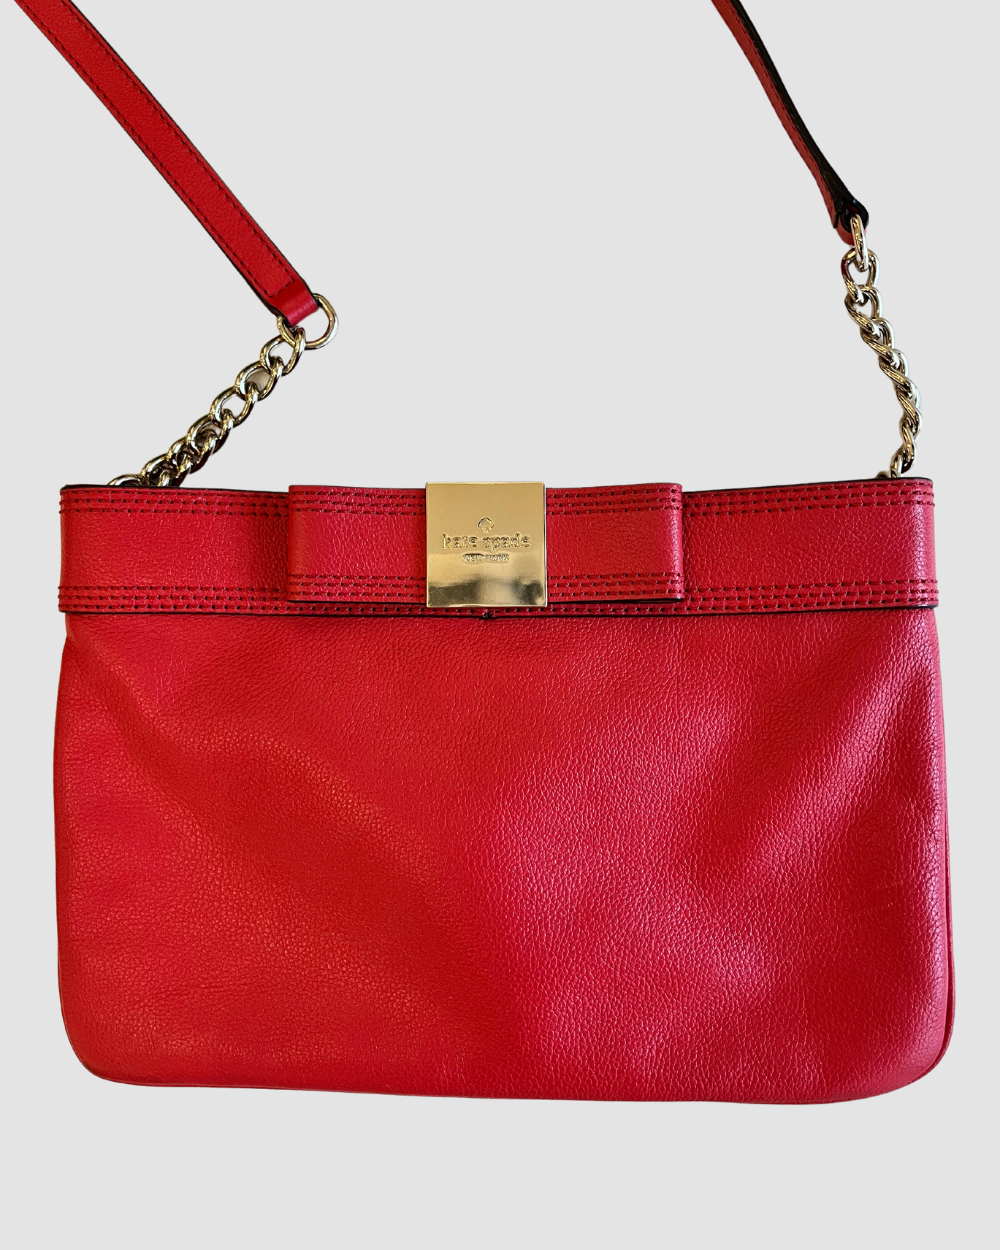 Kate Spade Red Leather Crossbody Bag